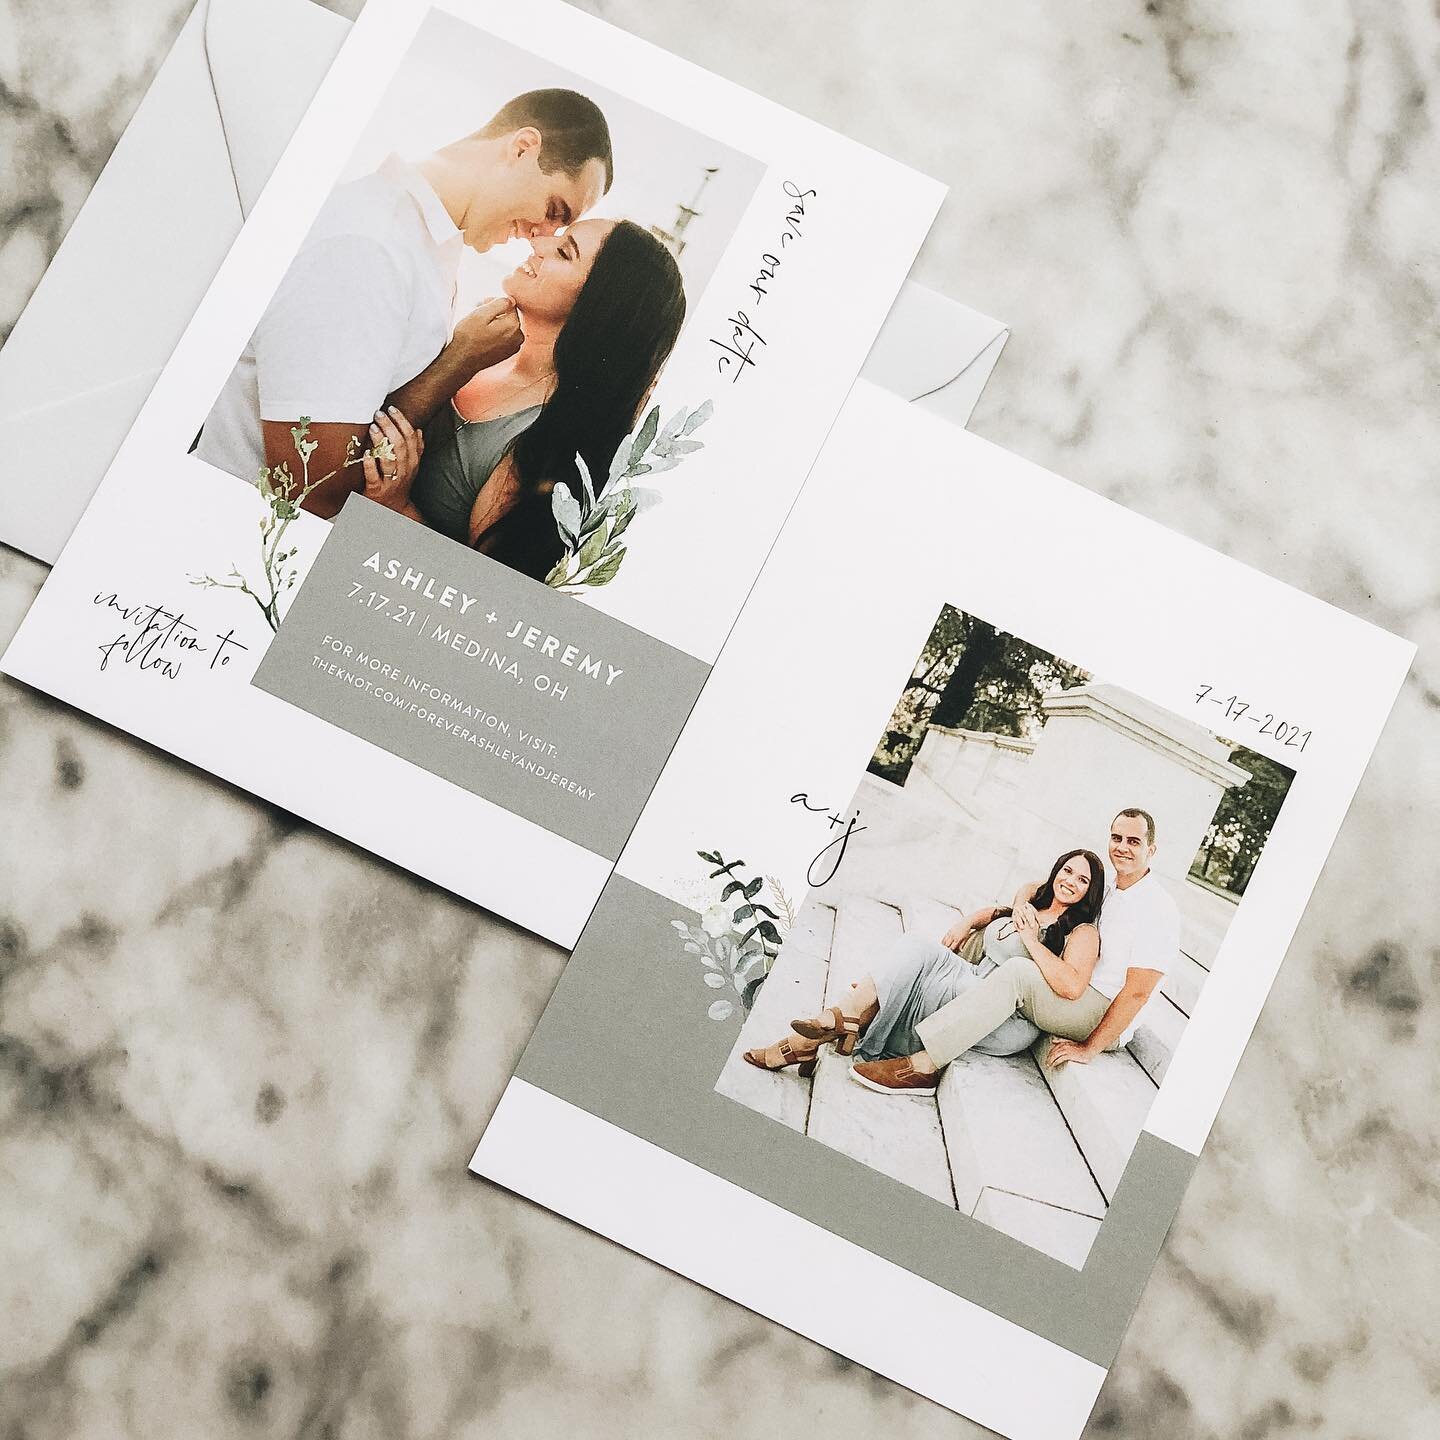 Ashley &amp; Jeremy&rsquo;s save the dates are hitting mailboxes this week ✨ it&rsquo;s so much fun designing for a close friend! We had a hard time deciding on the final design since their engagement photos made every one look so great!